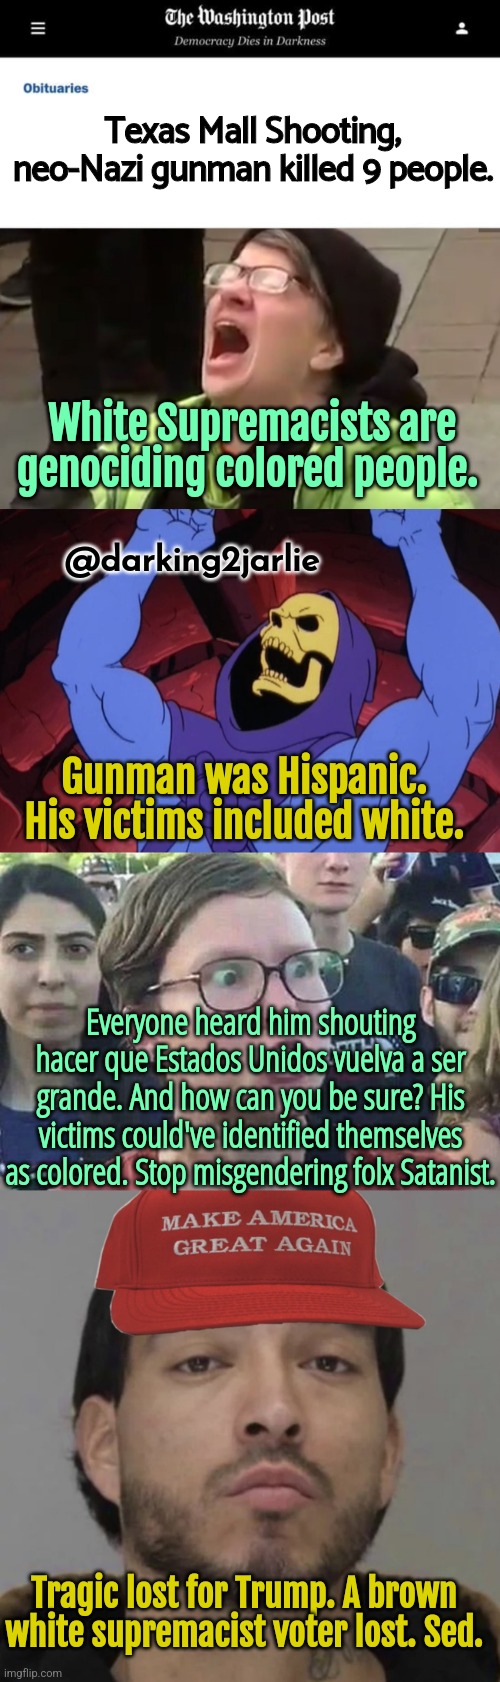 The Washington Hoax | Texas Mall Shooting, neo-Nazi gunman killed 9 people. White Supremacists are genociding colored people. @darking2jarlie; Gunman was Hispanic. His victims included white. Everyone heard him shouting hacer que Estados Unidos vuelva a ser grande. And how can you be sure? His victims could've identified themselves as colored. Stop misgendering folx Satanist. Tragic lost for Trump. A brown white supremacist voter lost. Sed. | image tagged in screaming liberal,skeletor,triggered liberal,white supremacy,trump,texas | made w/ Imgflip meme maker